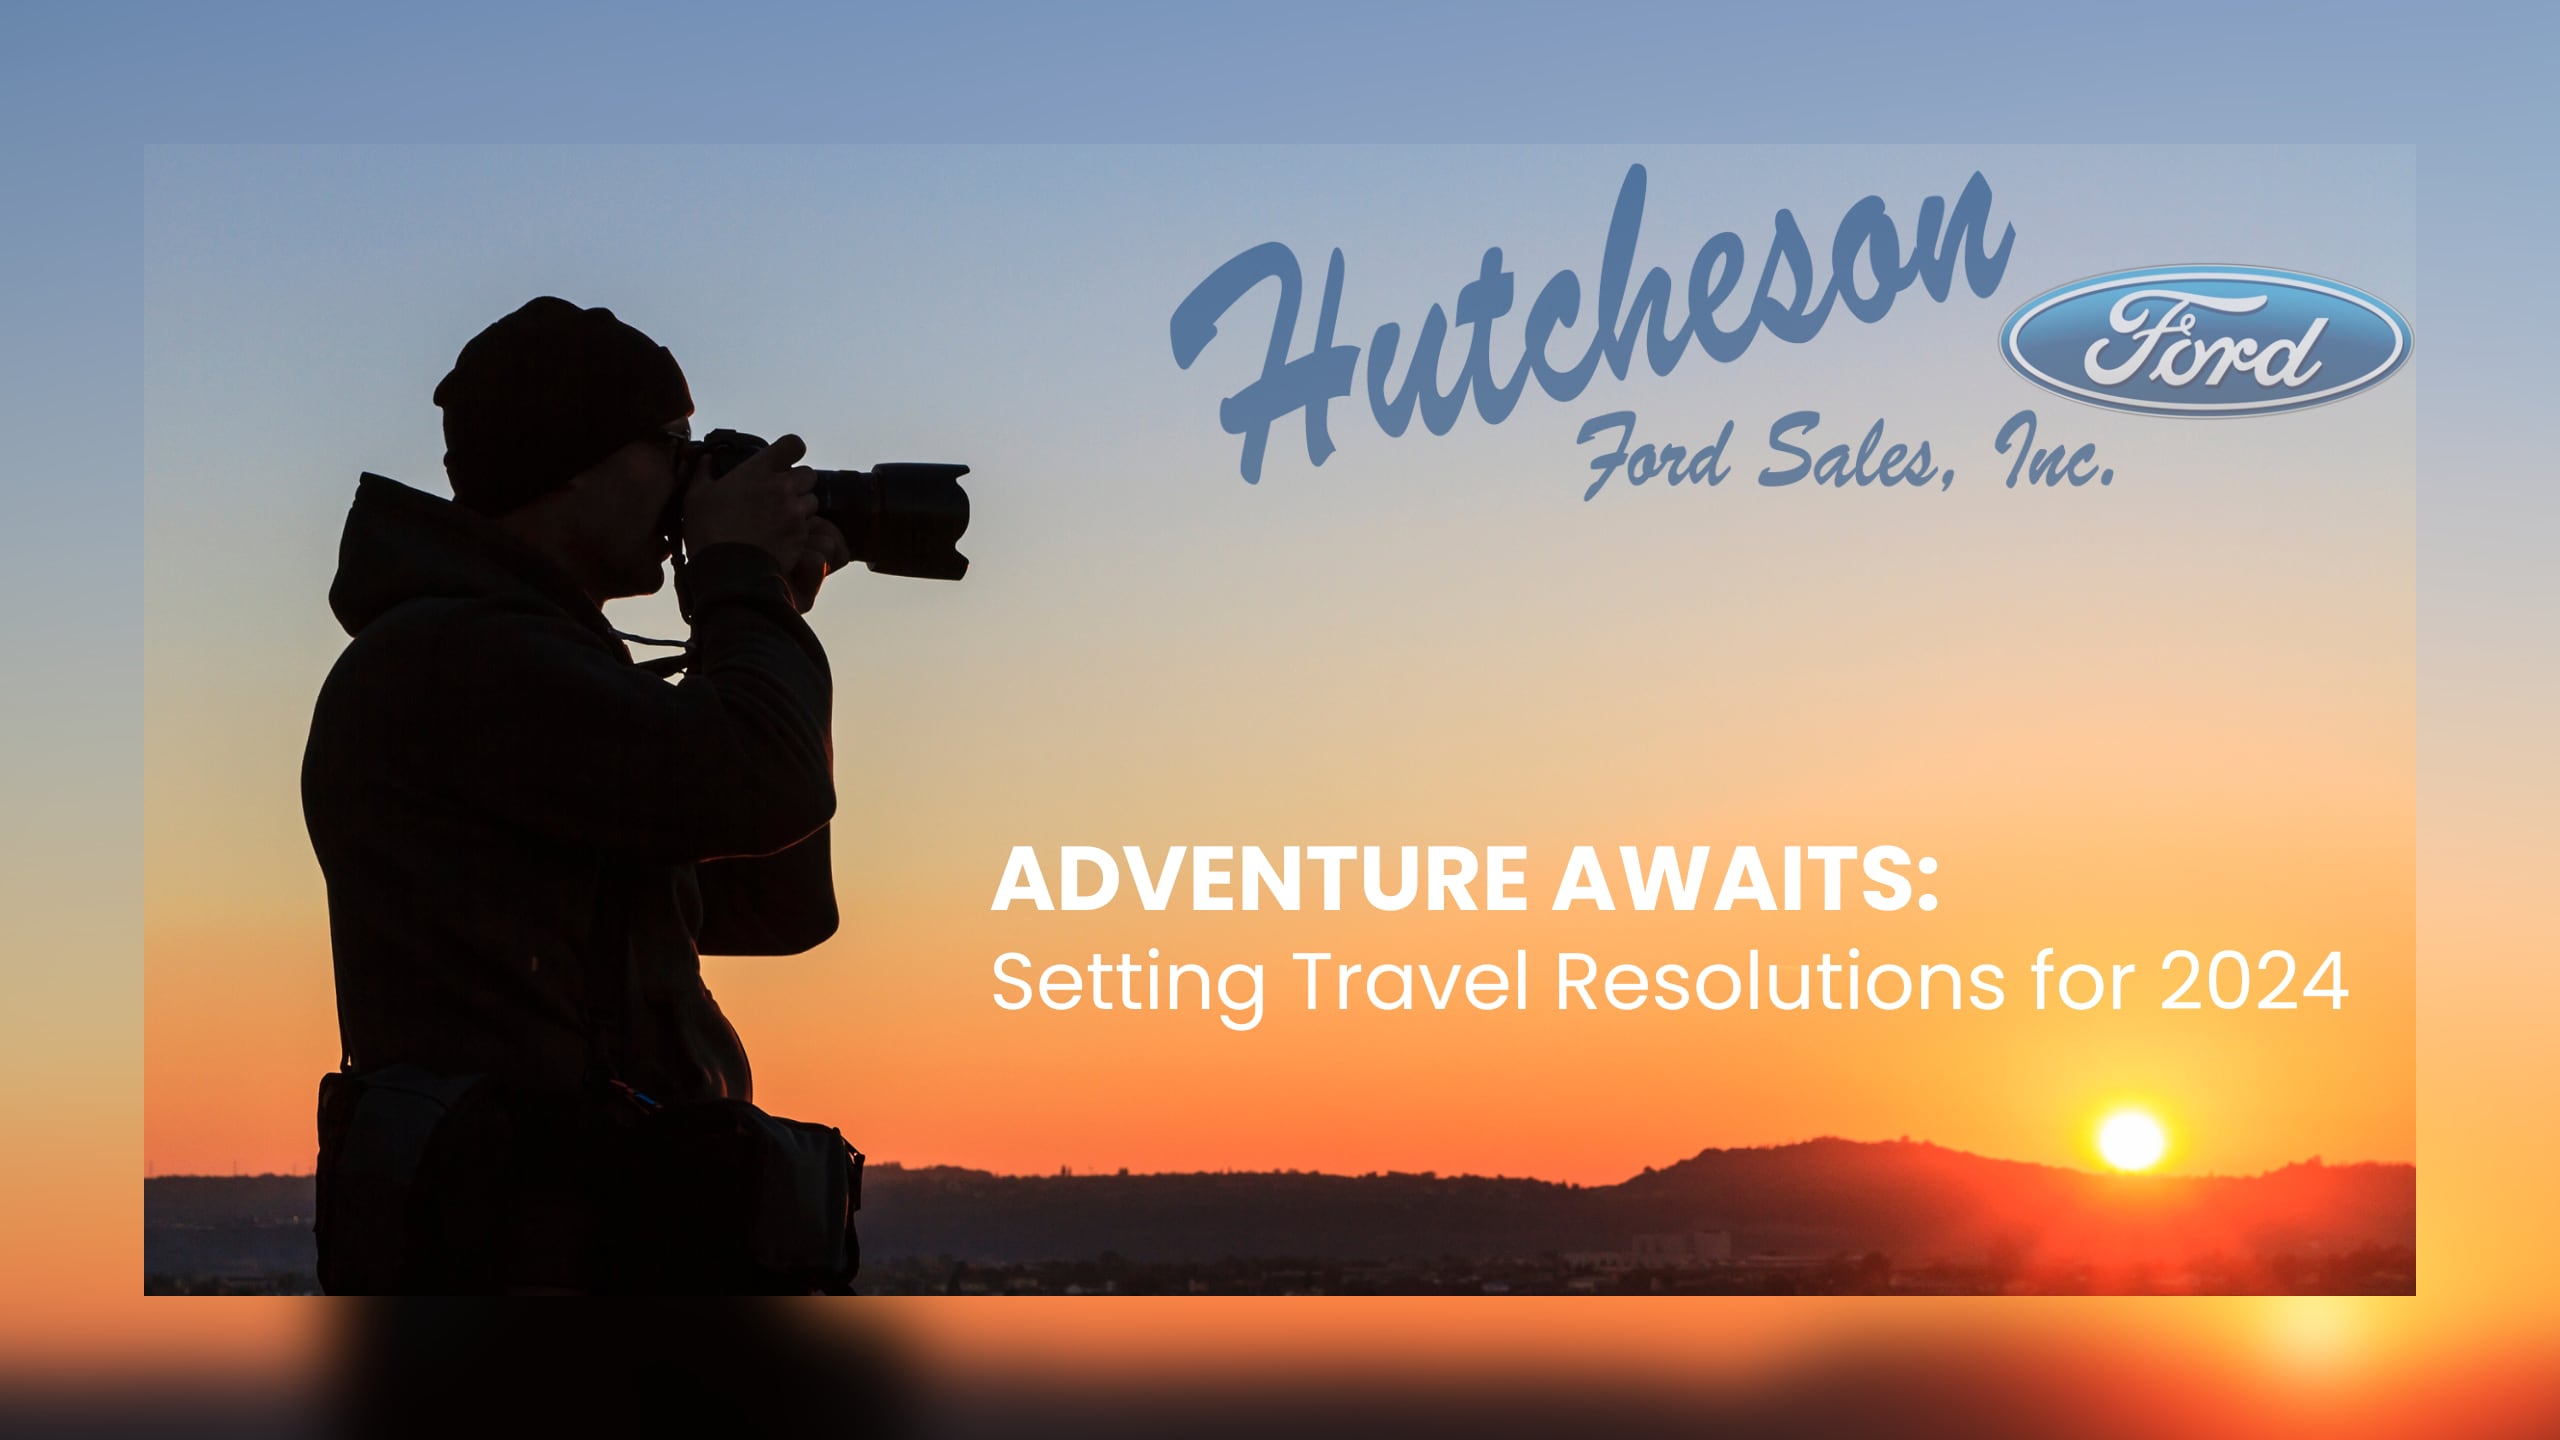 Hutcheson Travel and Rental Blog Post.png